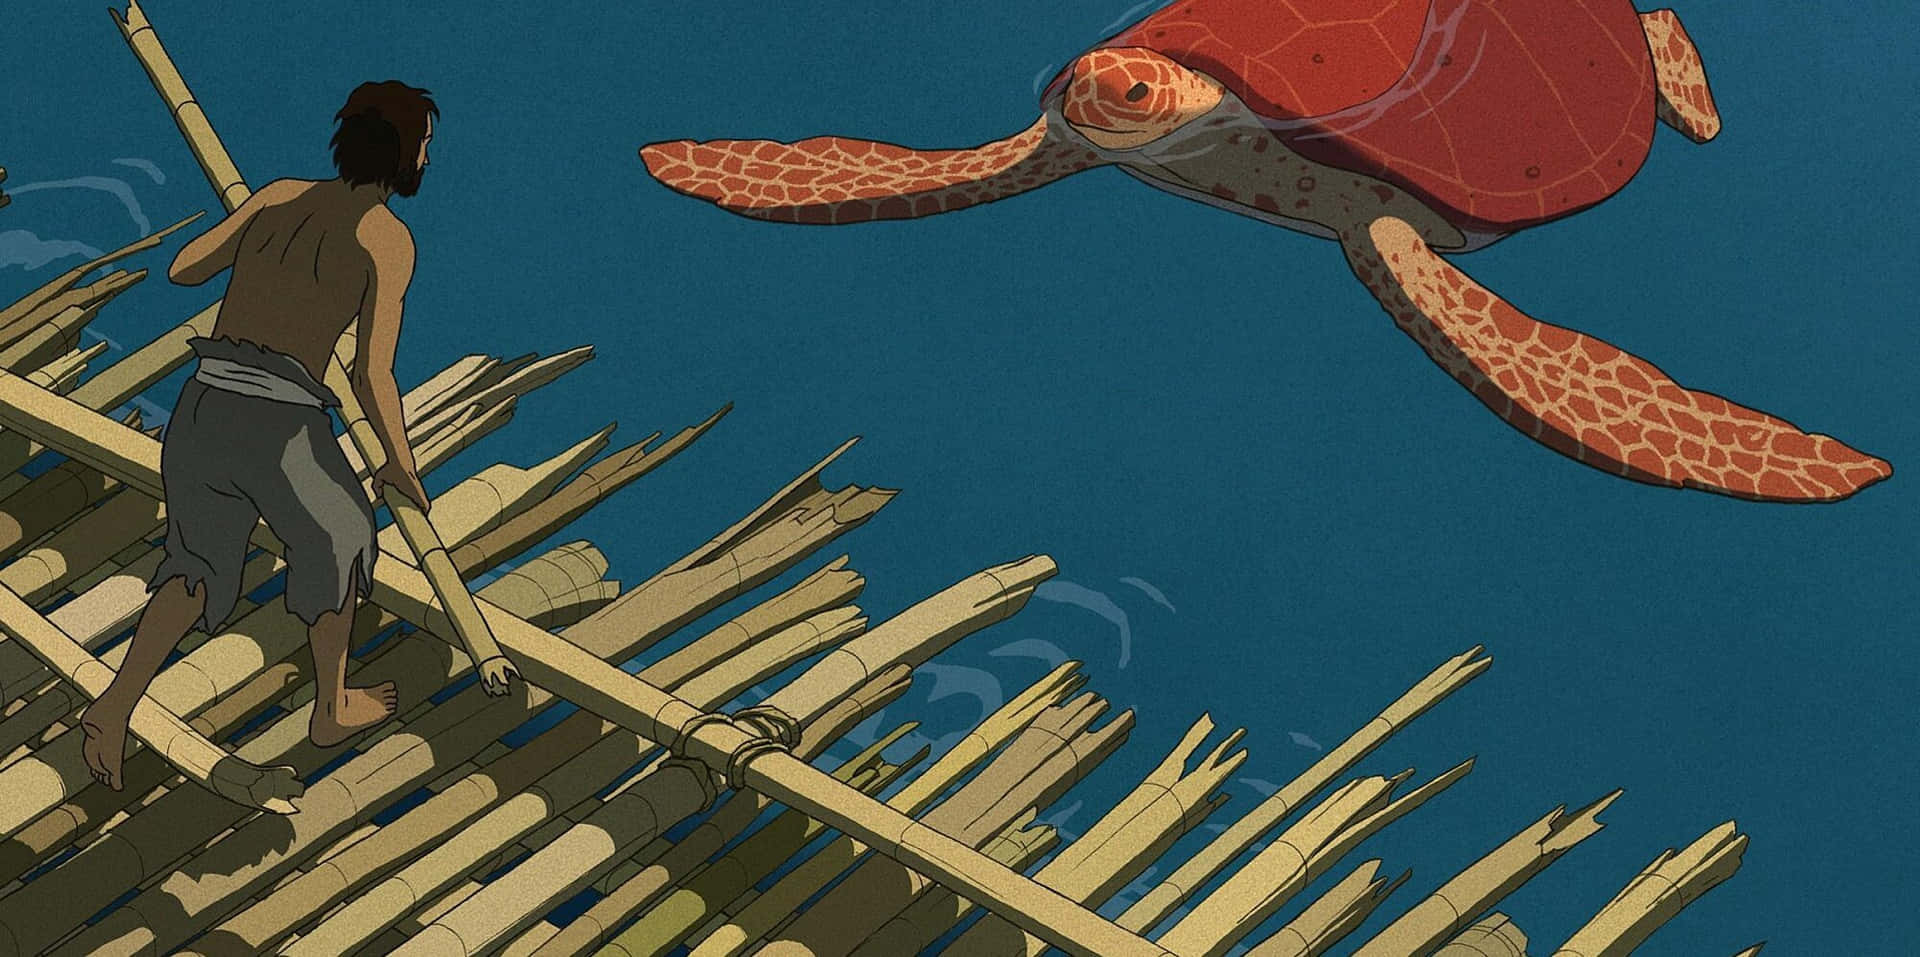 Tranquil scene from The Red Turtle animated film Wallpaper